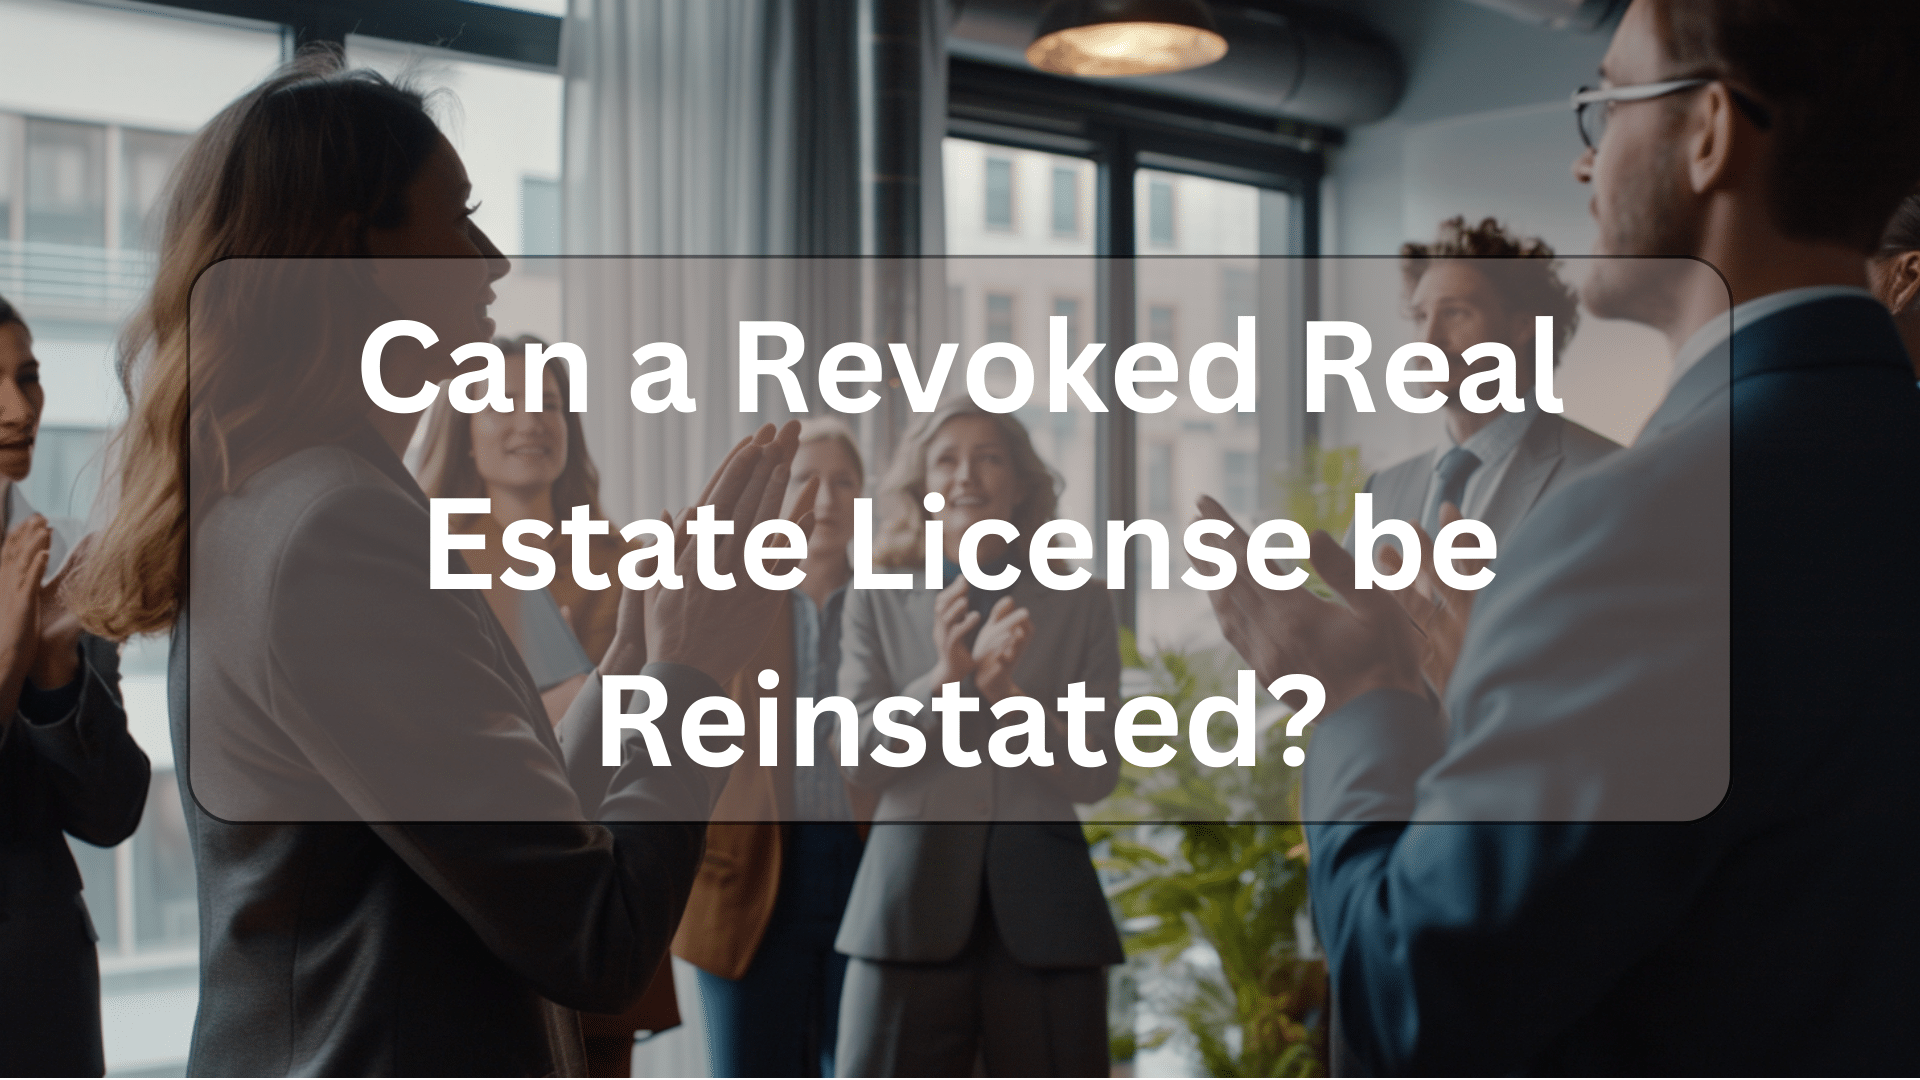 Can a revoked real estate license be reinstated illustration